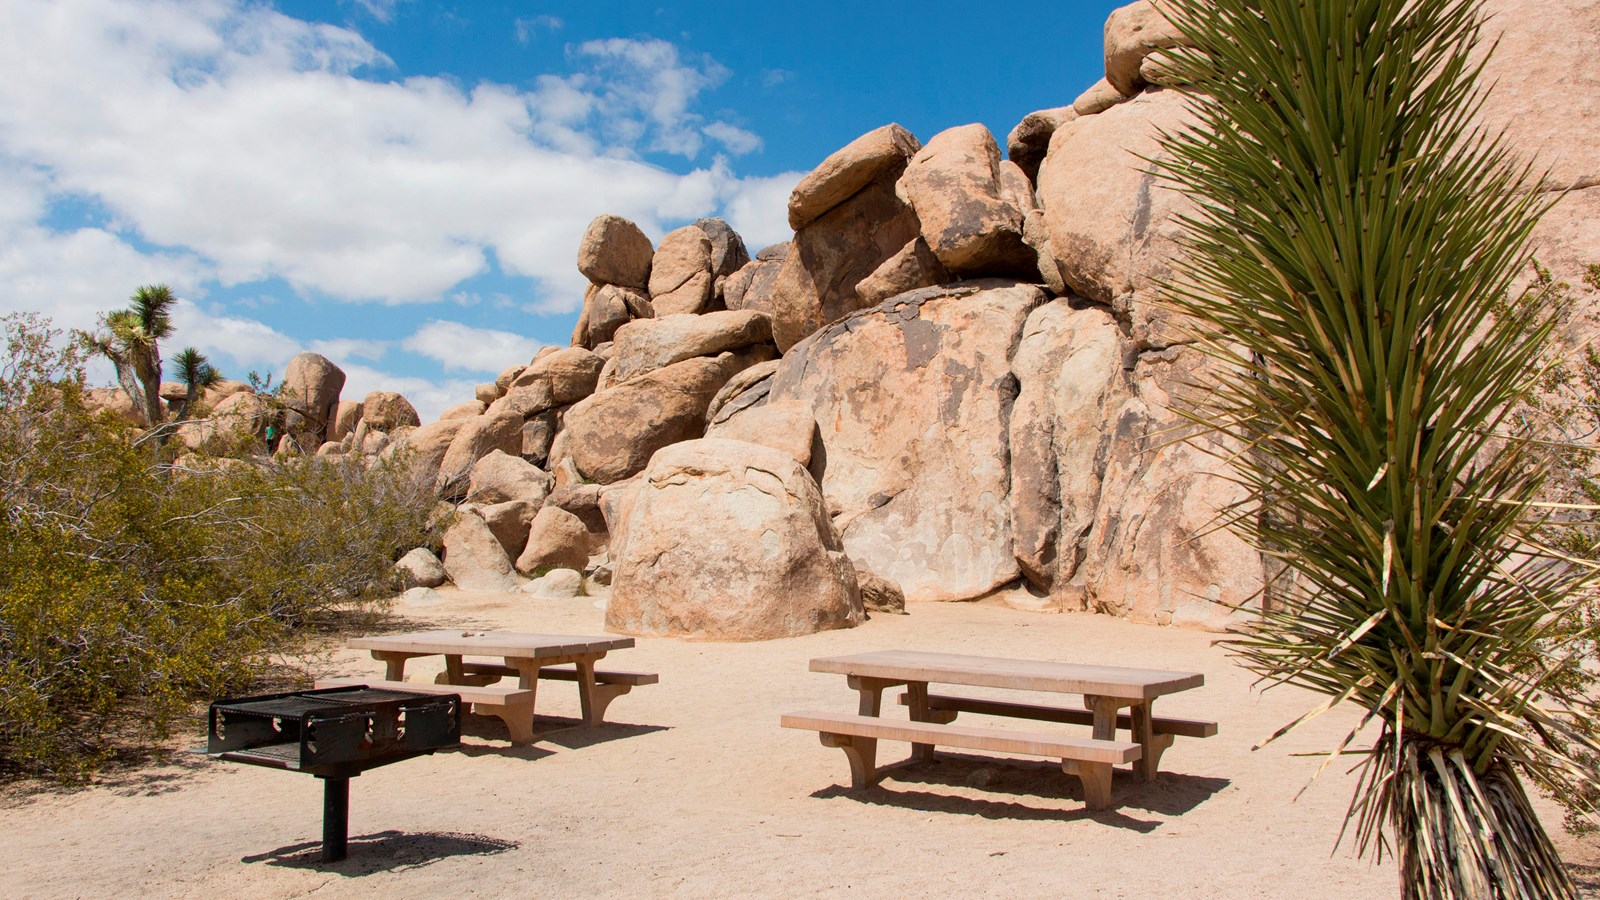 Two picnic tables and a grill in front of a large rock formation with scattered shrubs.